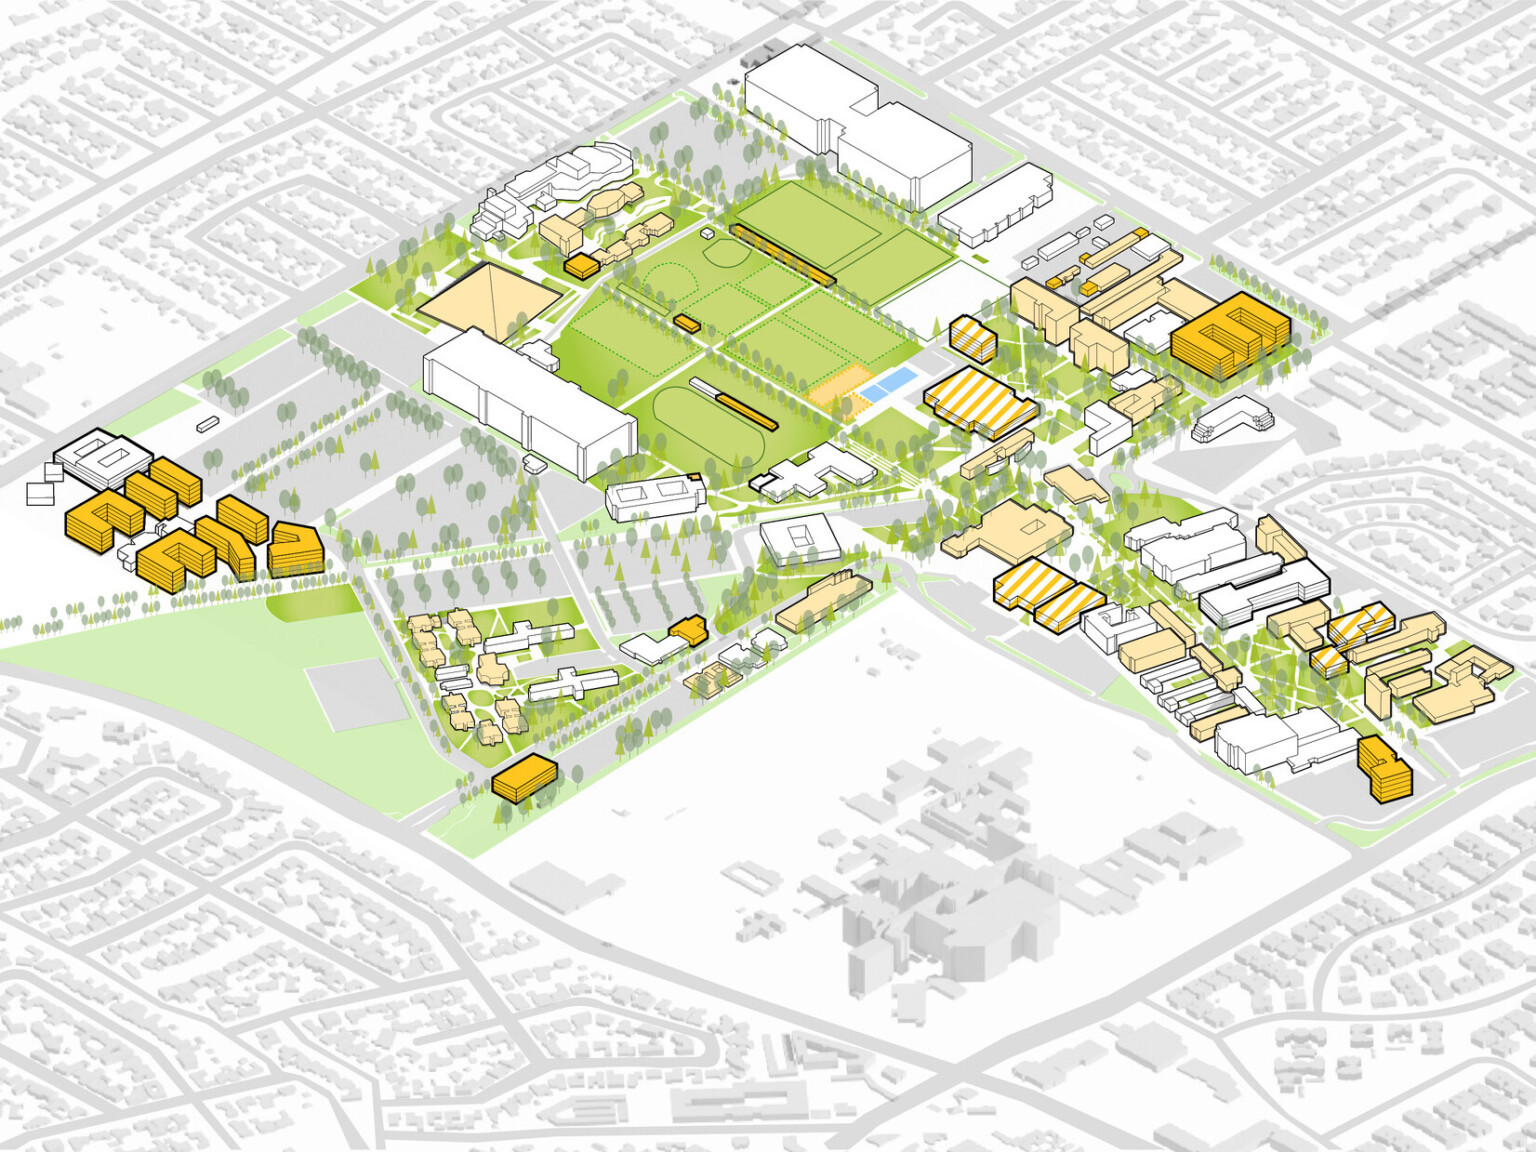 California State University Long Beach, animated aerial map, green space, building models, future planning, campus vision plan, higher education, phased construction, wellness